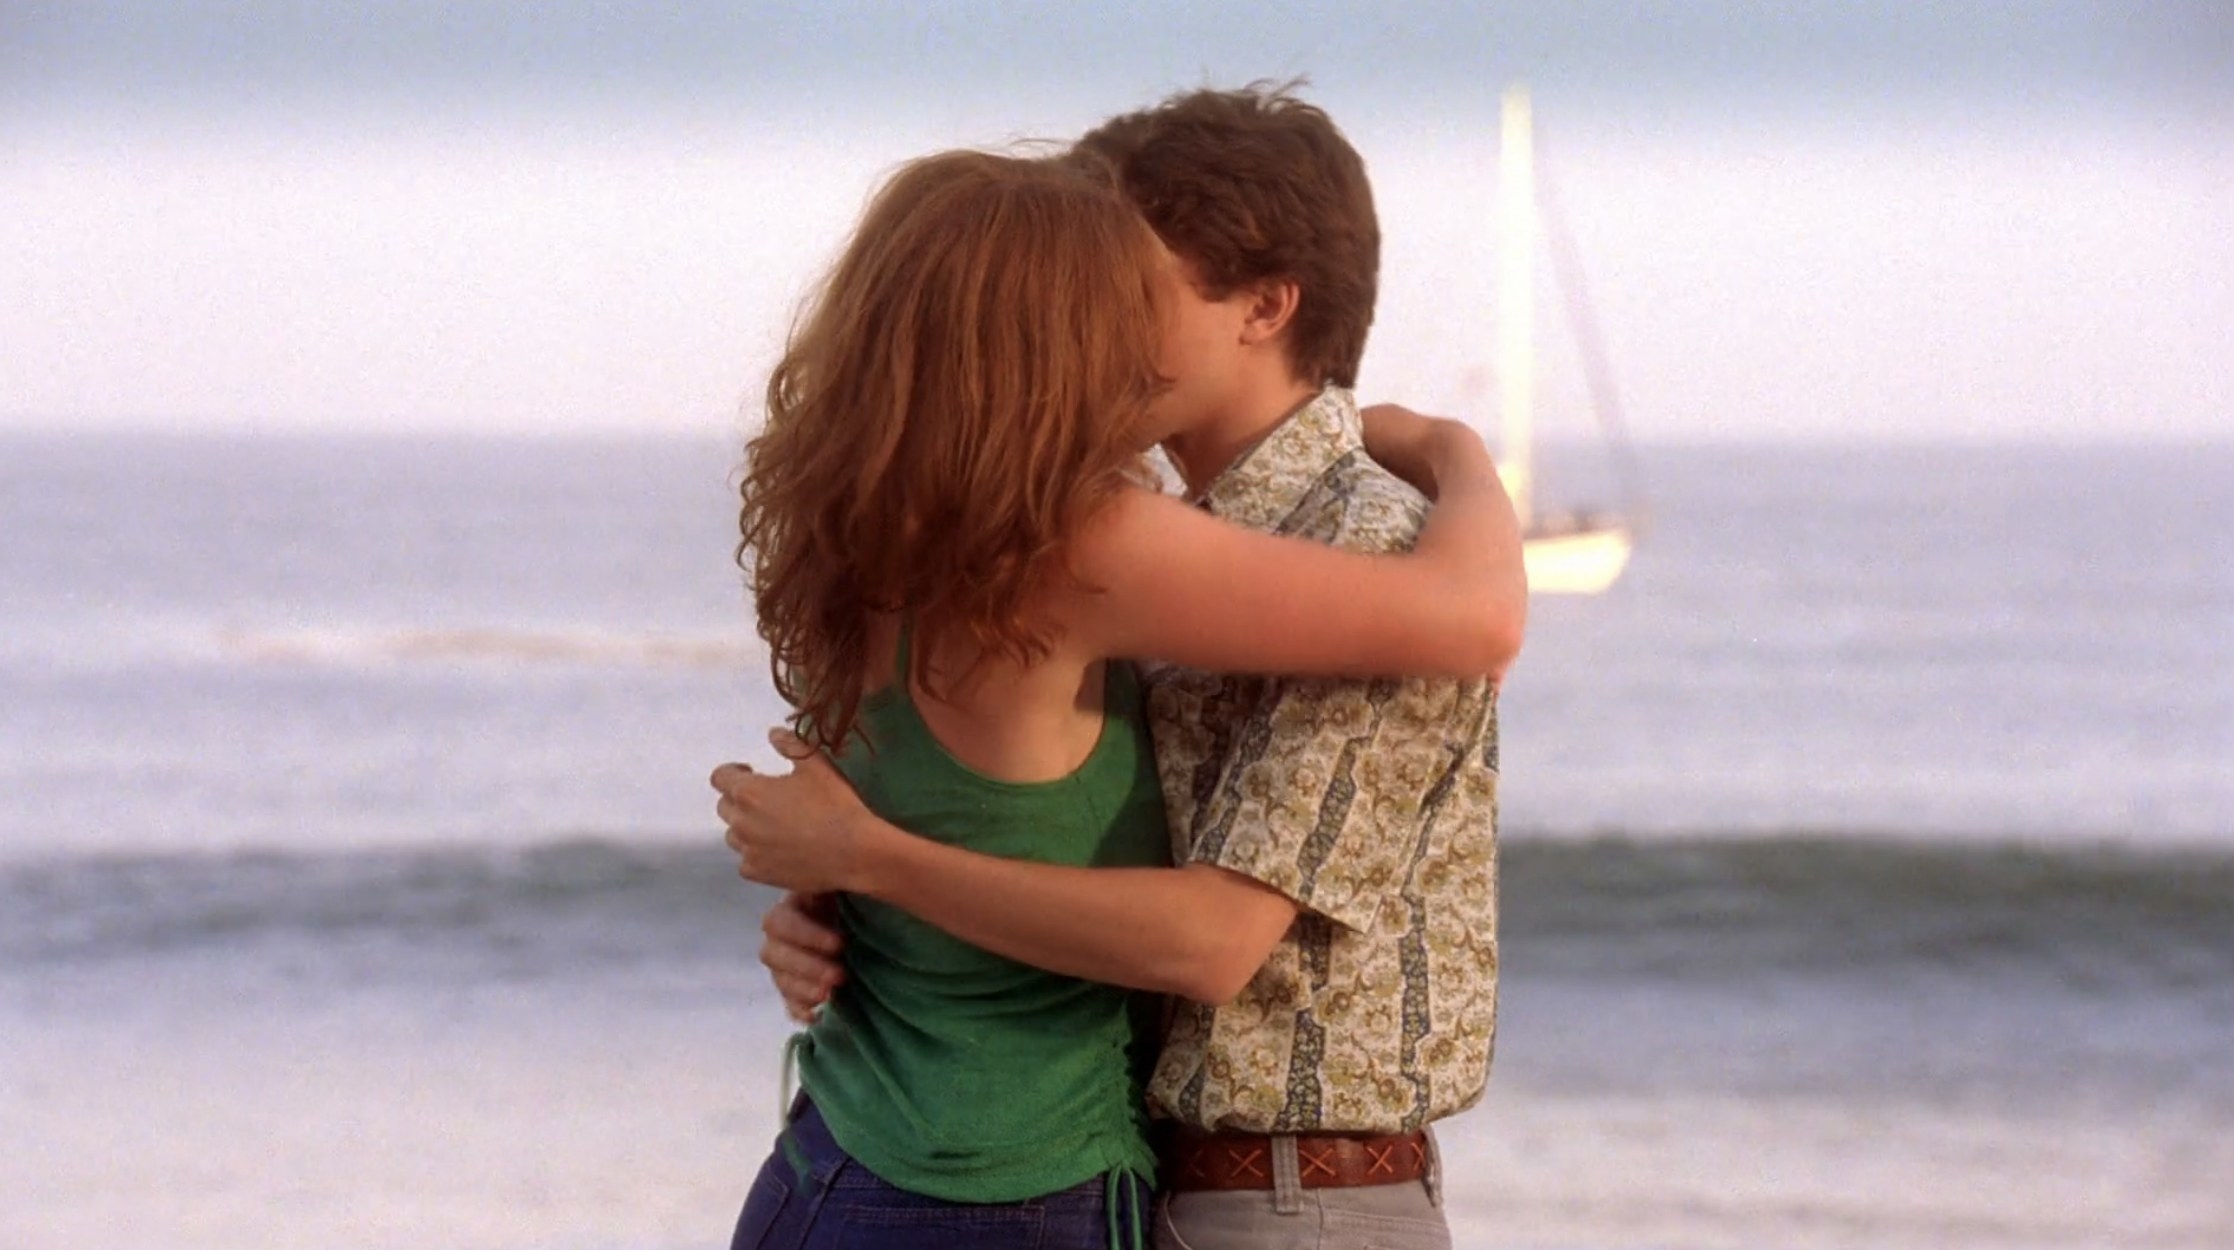 Eric and Donna embrace on the beach and share a kiss